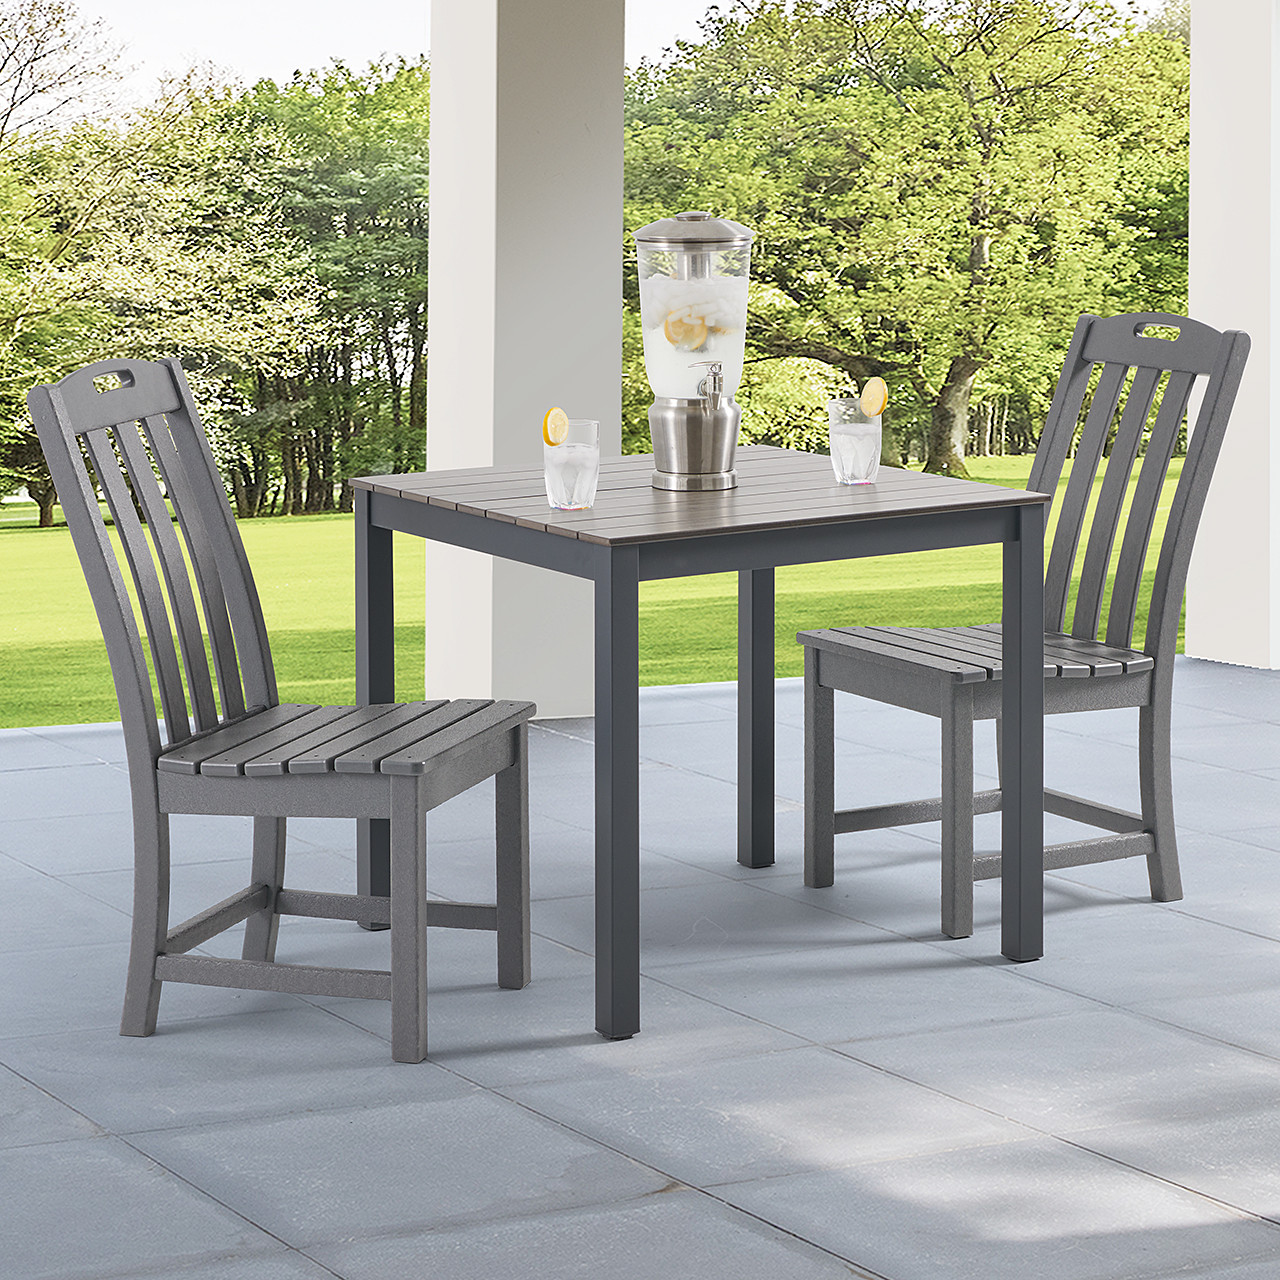 Surfside Slate Grey 3 Pc. Armless Bistro Set with 33 in. Sq Table